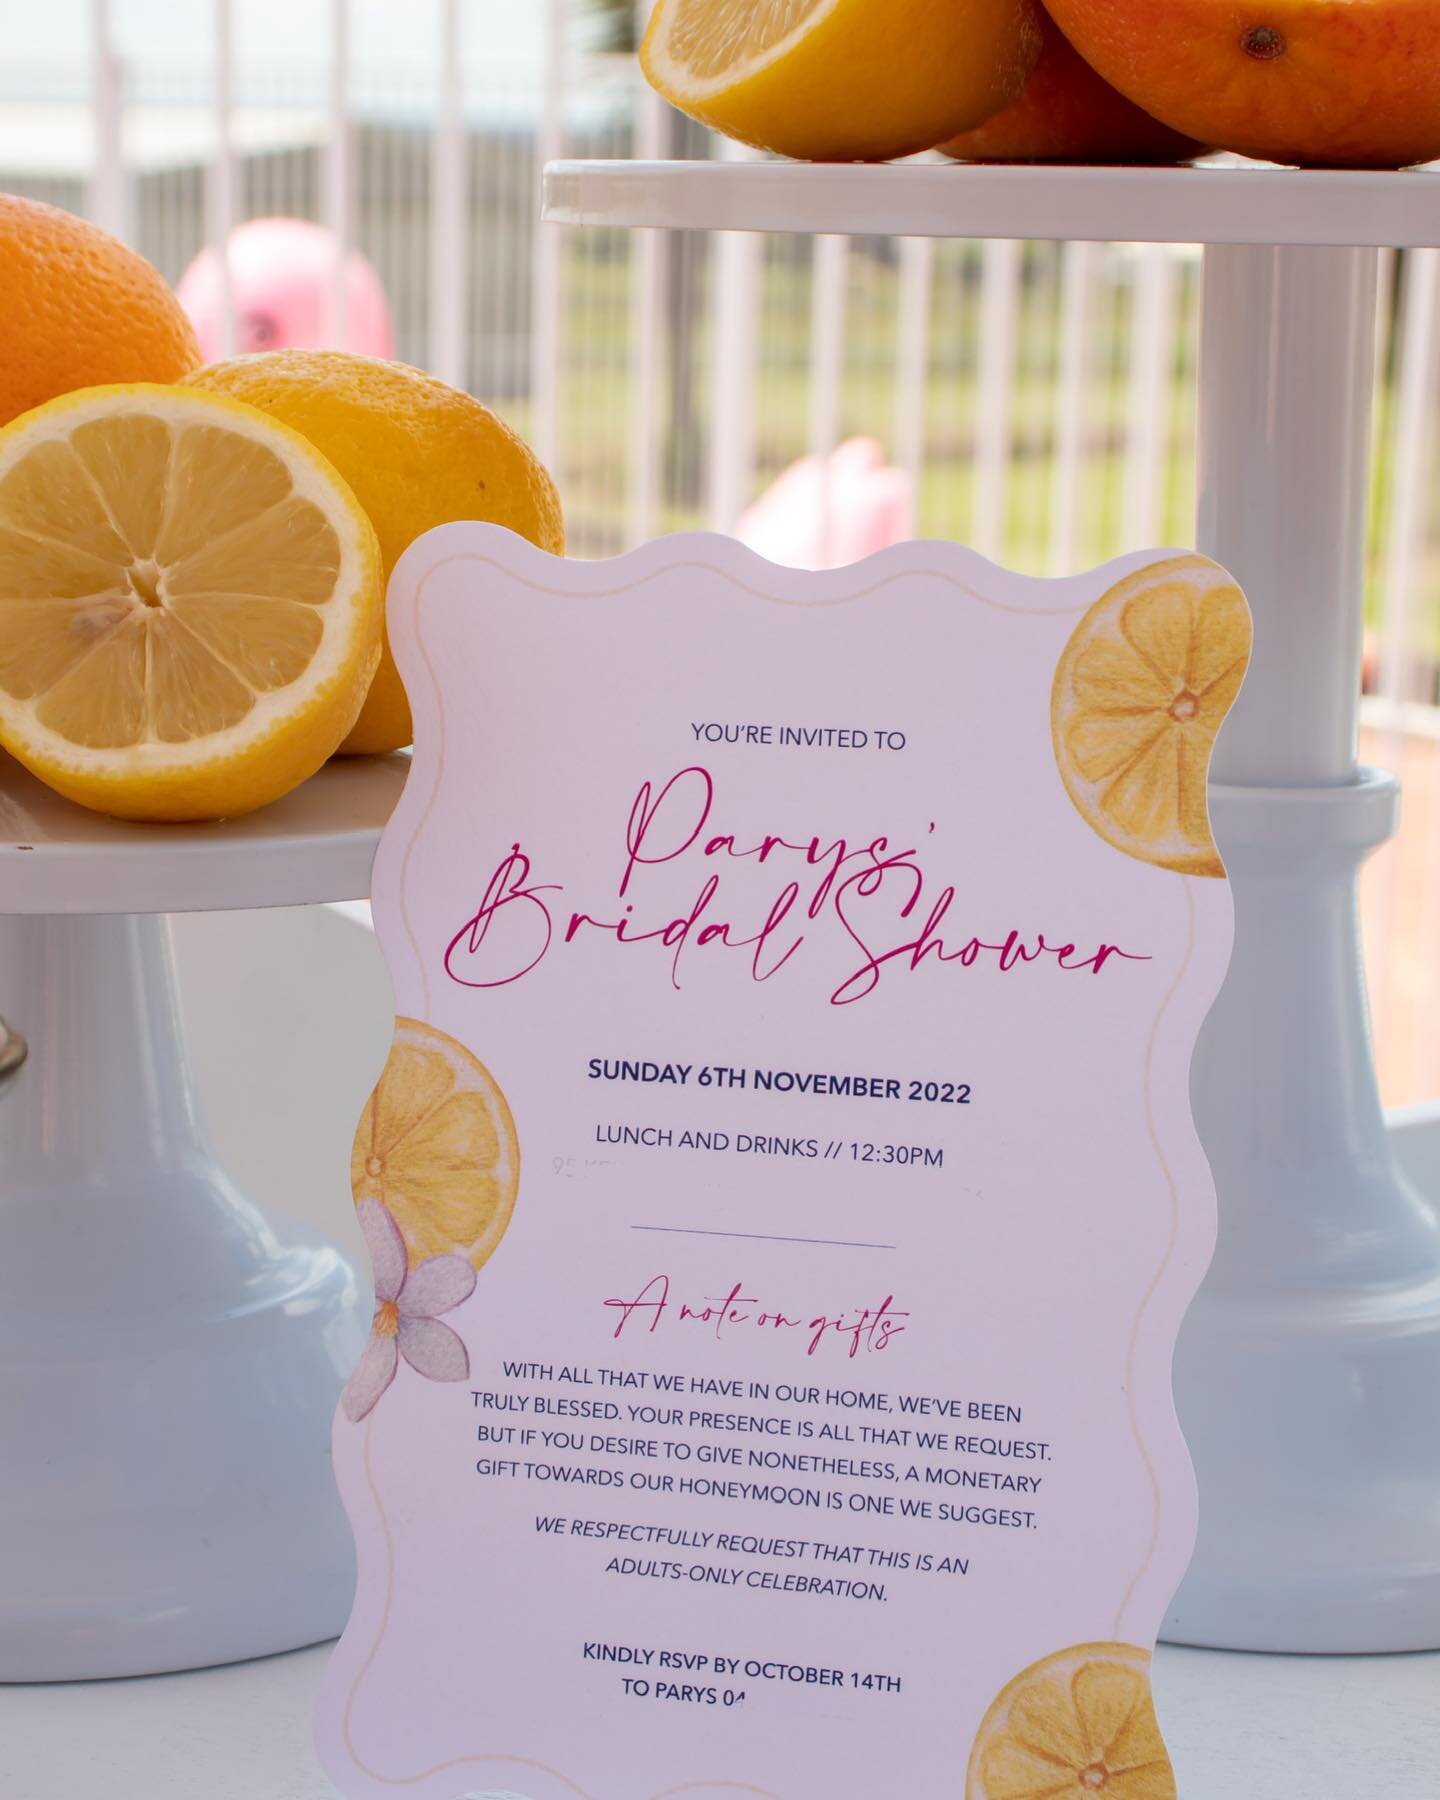 A moment for the invite ❤️&zwj;🔥

We LOVED creating this design for Parys&rsquo; Bridal Shower last year! It turned out exactly how we envisioned it 🍋🍊 

Getting excited for the wedding now!! Keep an eye out for the wedding suite designed by @_ami